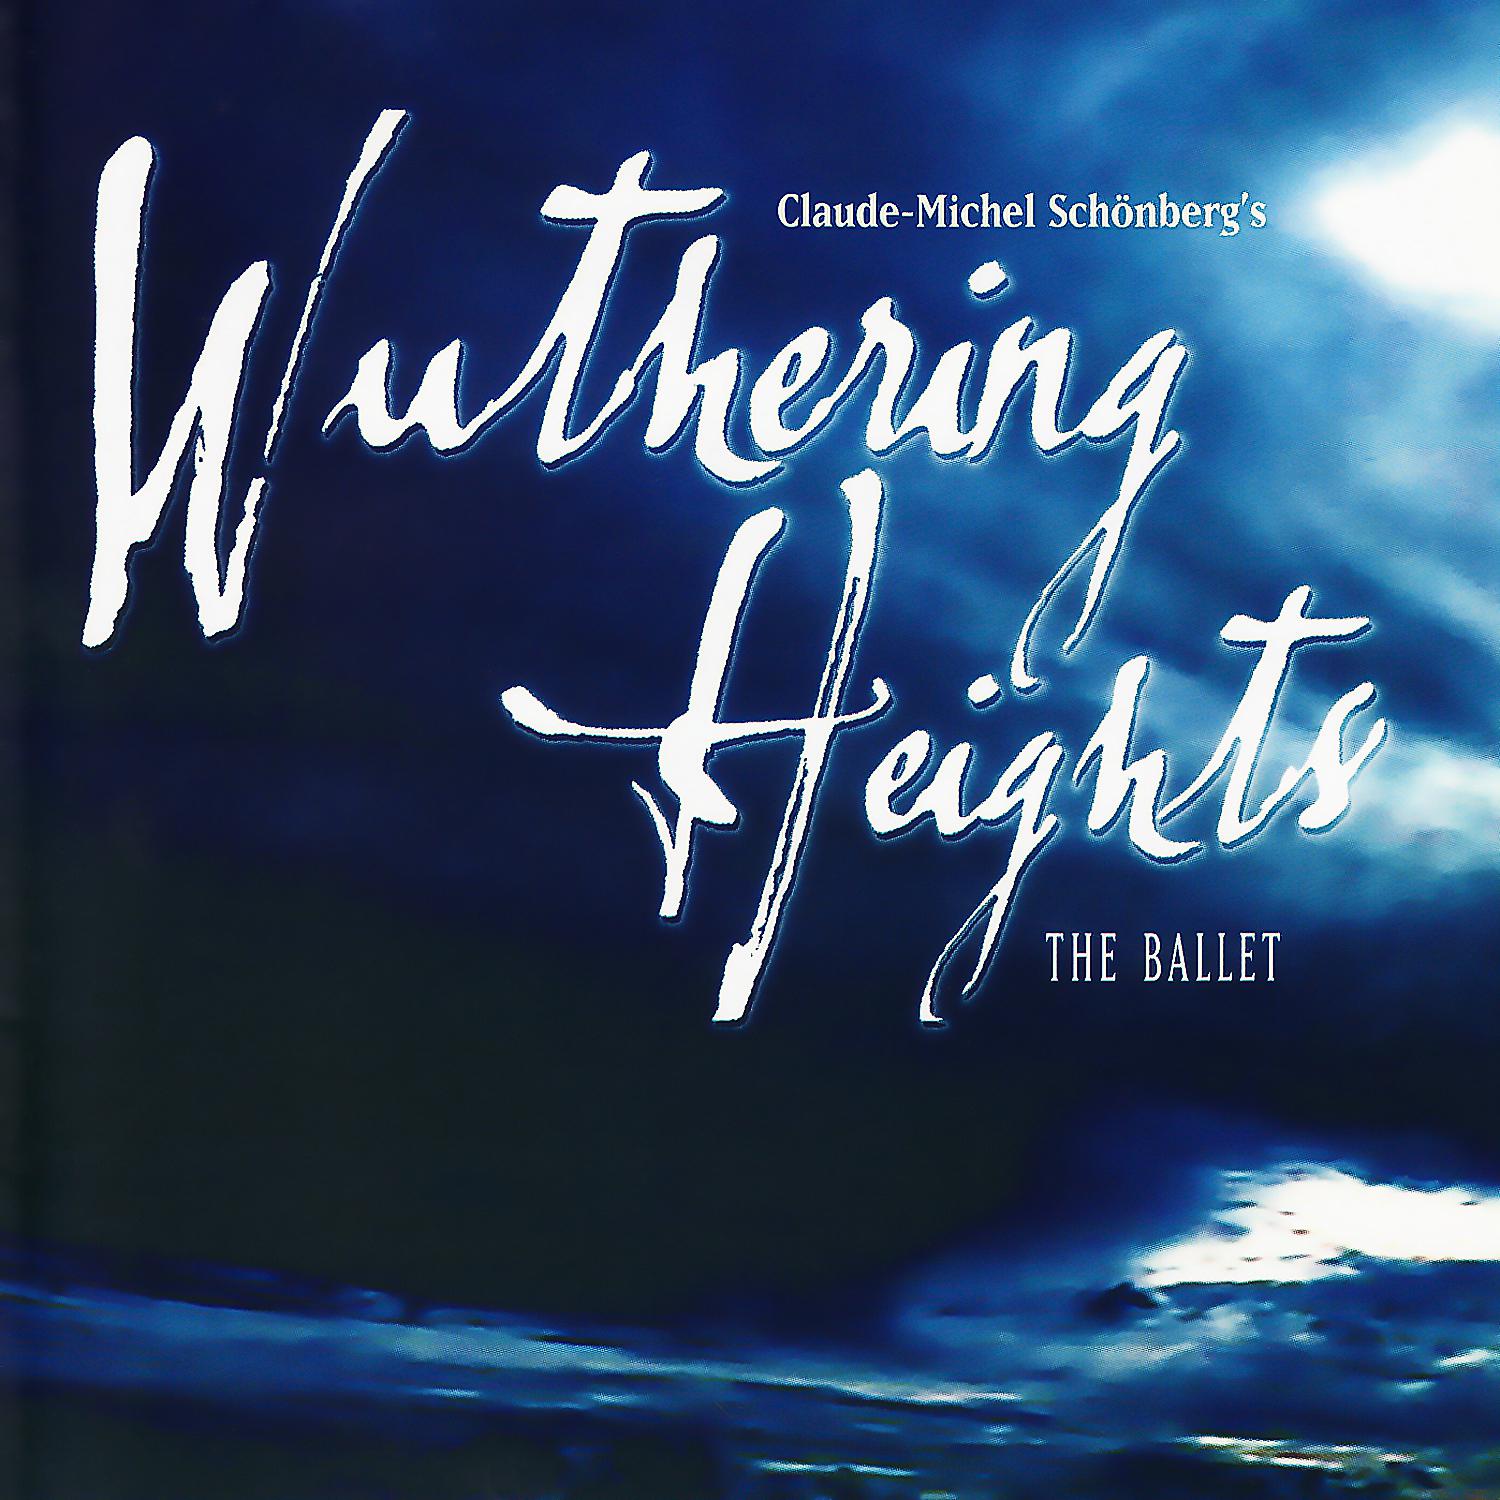 ClaudeMichel Sch nberg' s Wuthering Heights: The Ballet